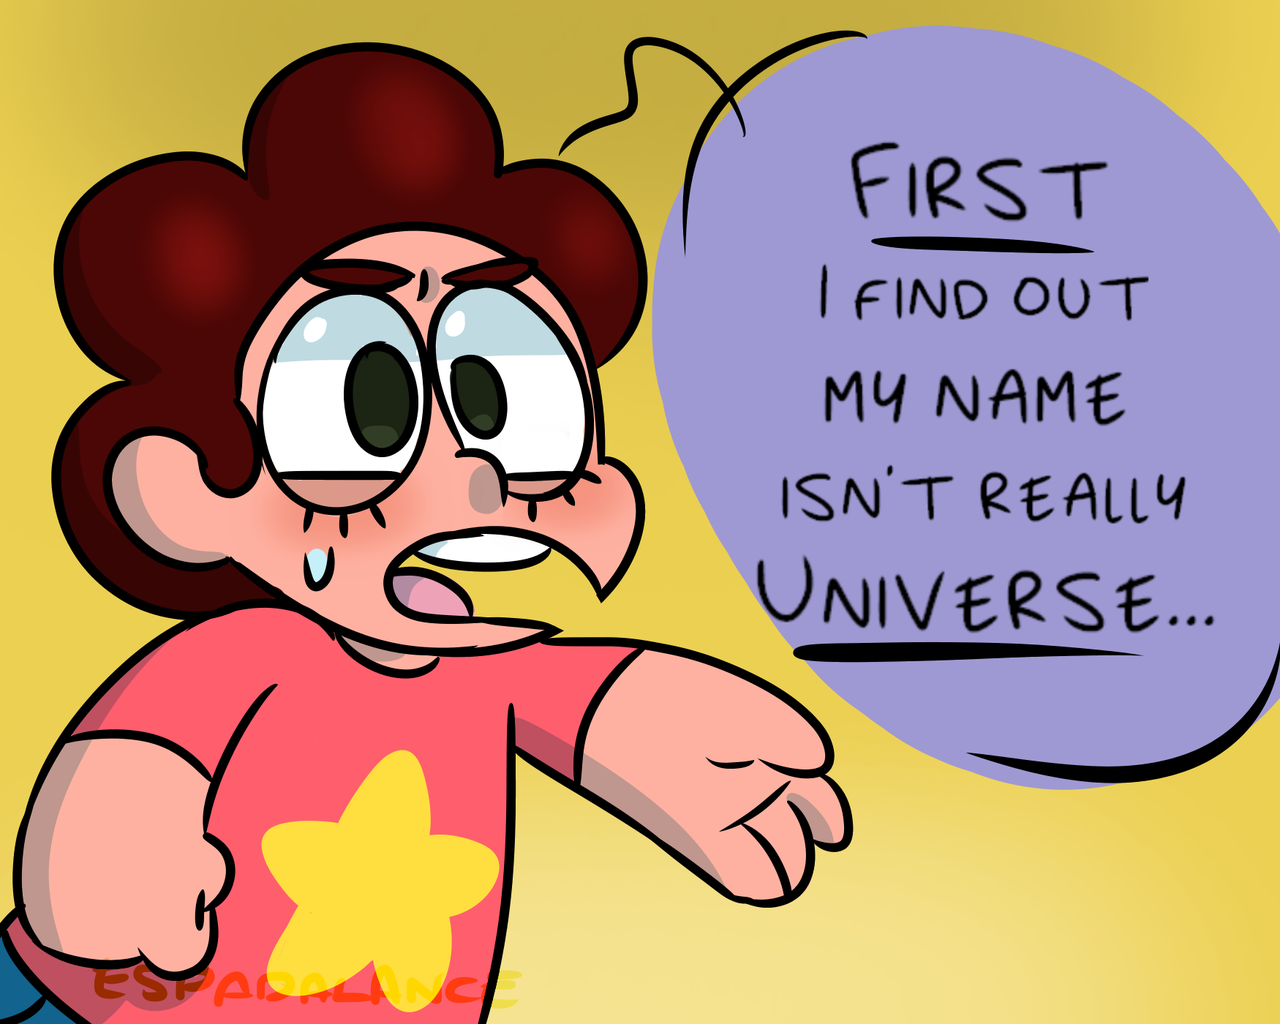 Surprisingly, he’s more upset about the name thing